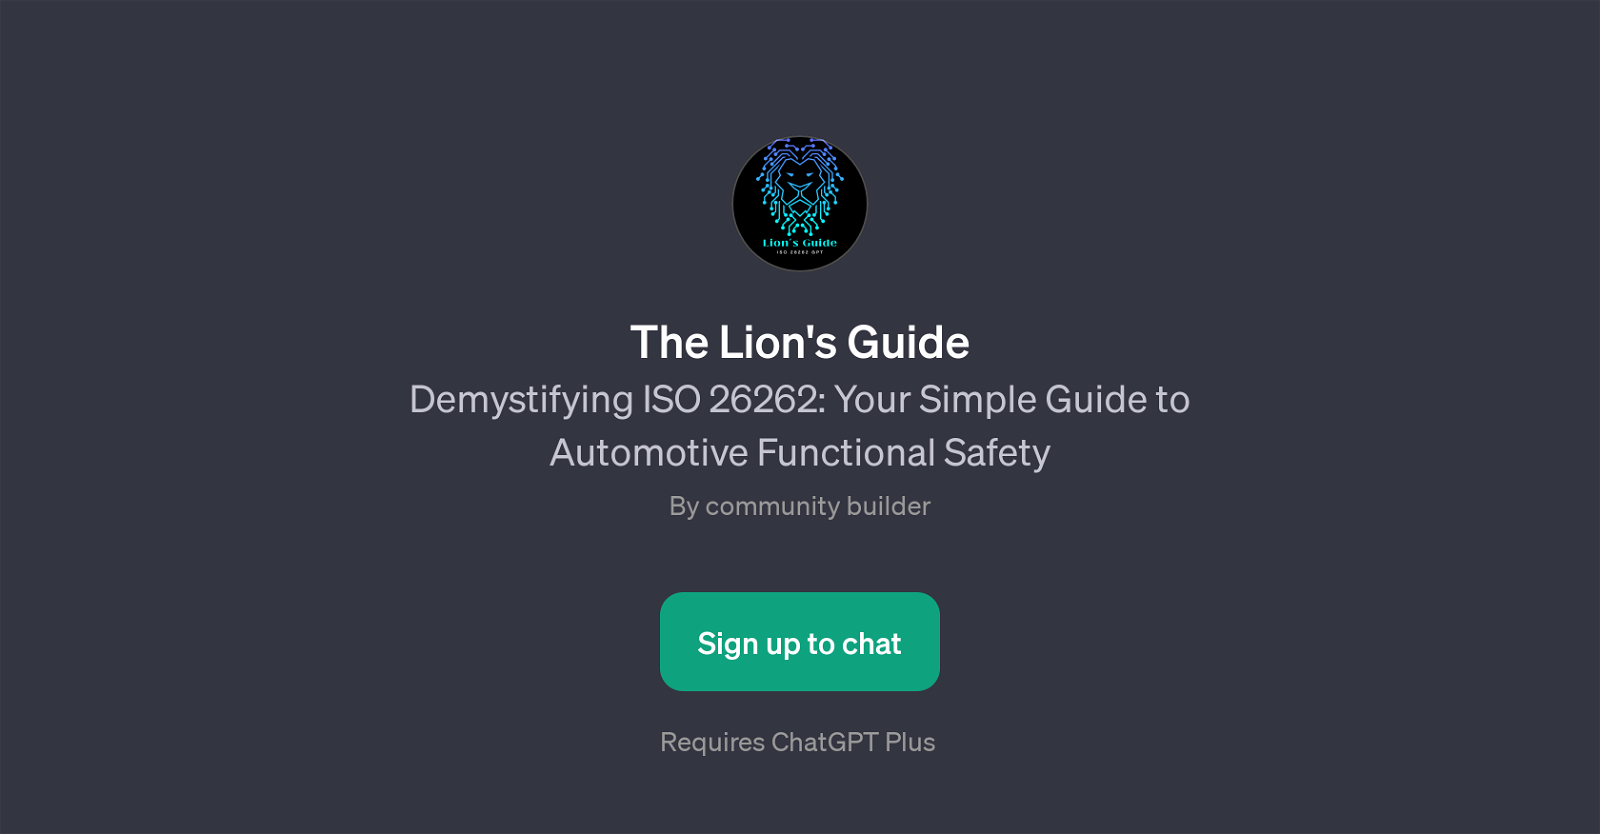 The Lion's Guide website